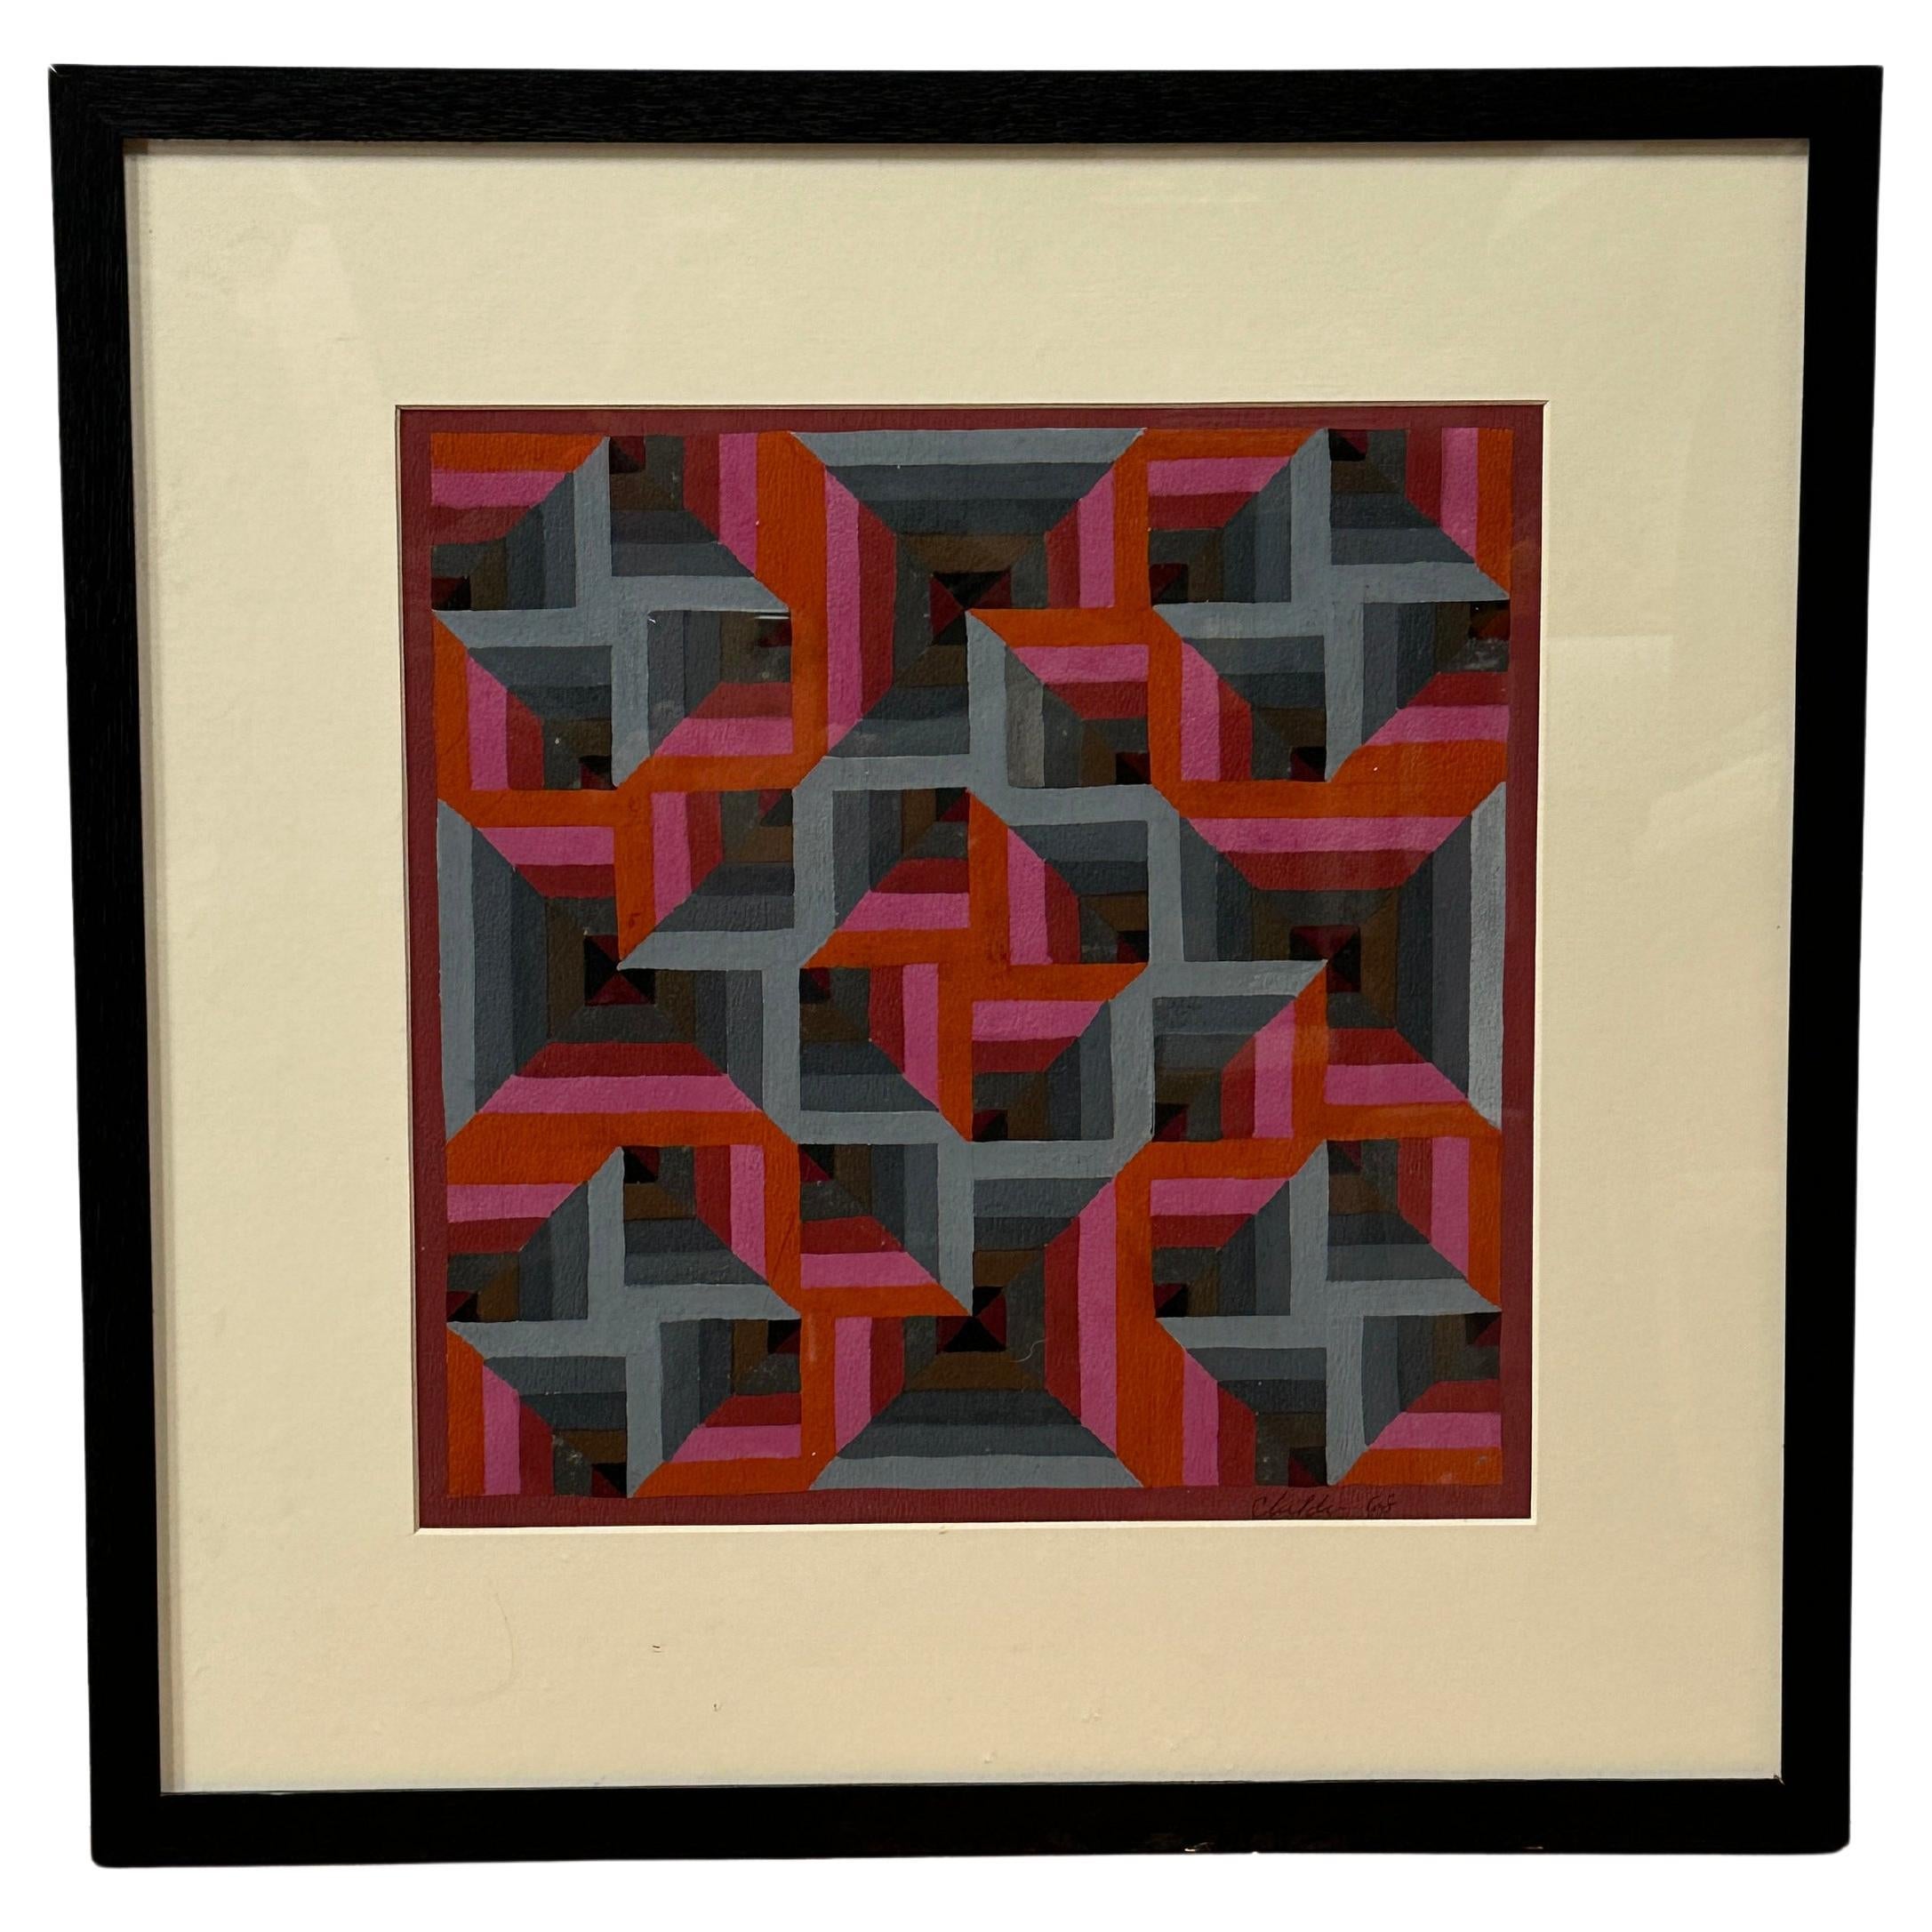 Geometric abstraction and optical art have been present in many cultures throughout history, both as decorative motifs and as art pieces themselves. In this work Childers, faithful to these currents of modern art, proposes a piece in which the means